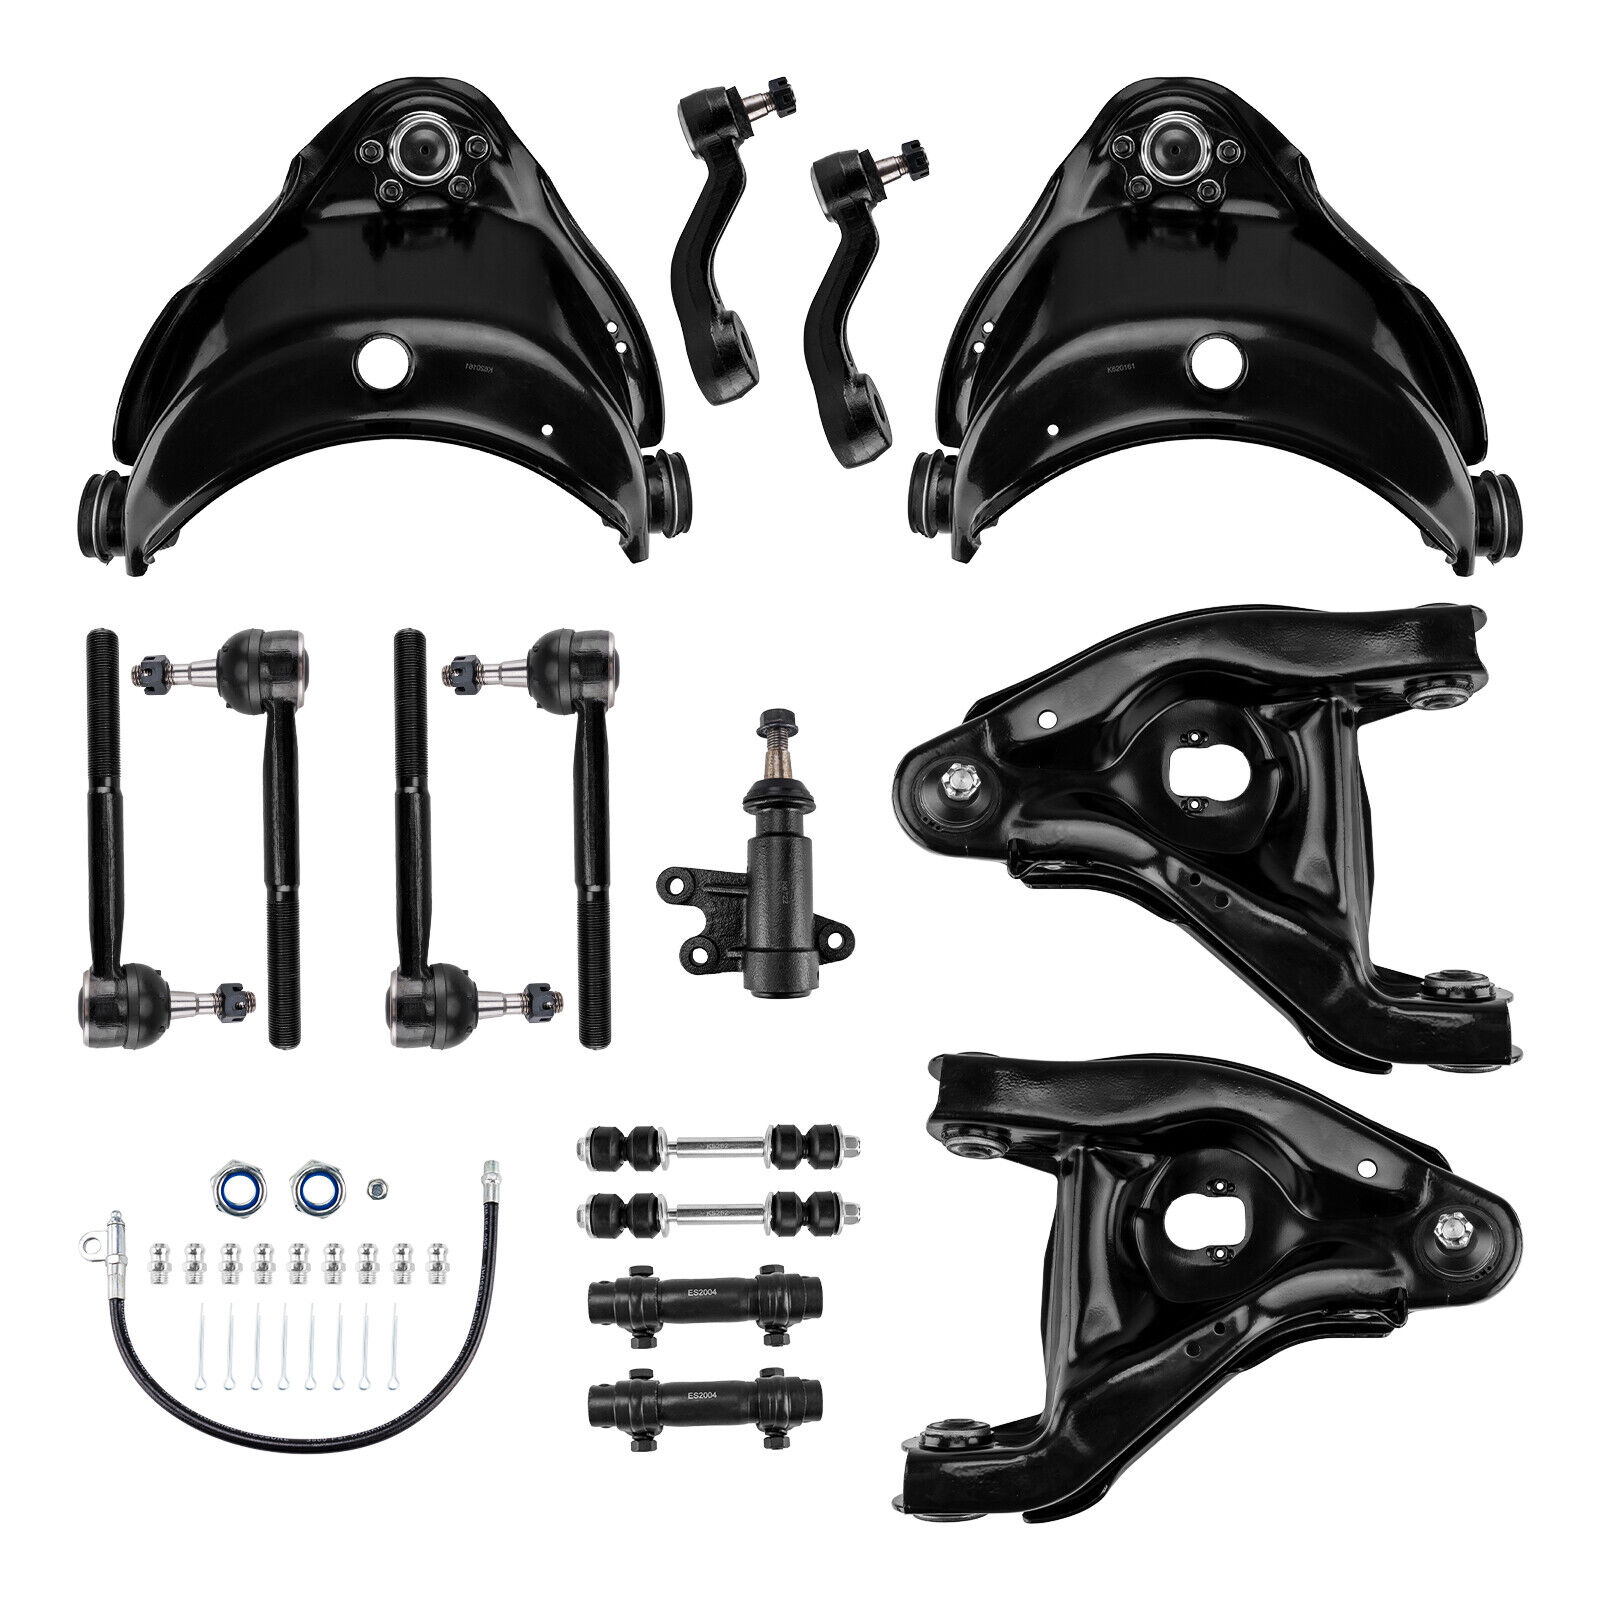 15Pc Complete Front Suspension Kit for 1993 1994-1999 Chevy & GMC C1500 C2500